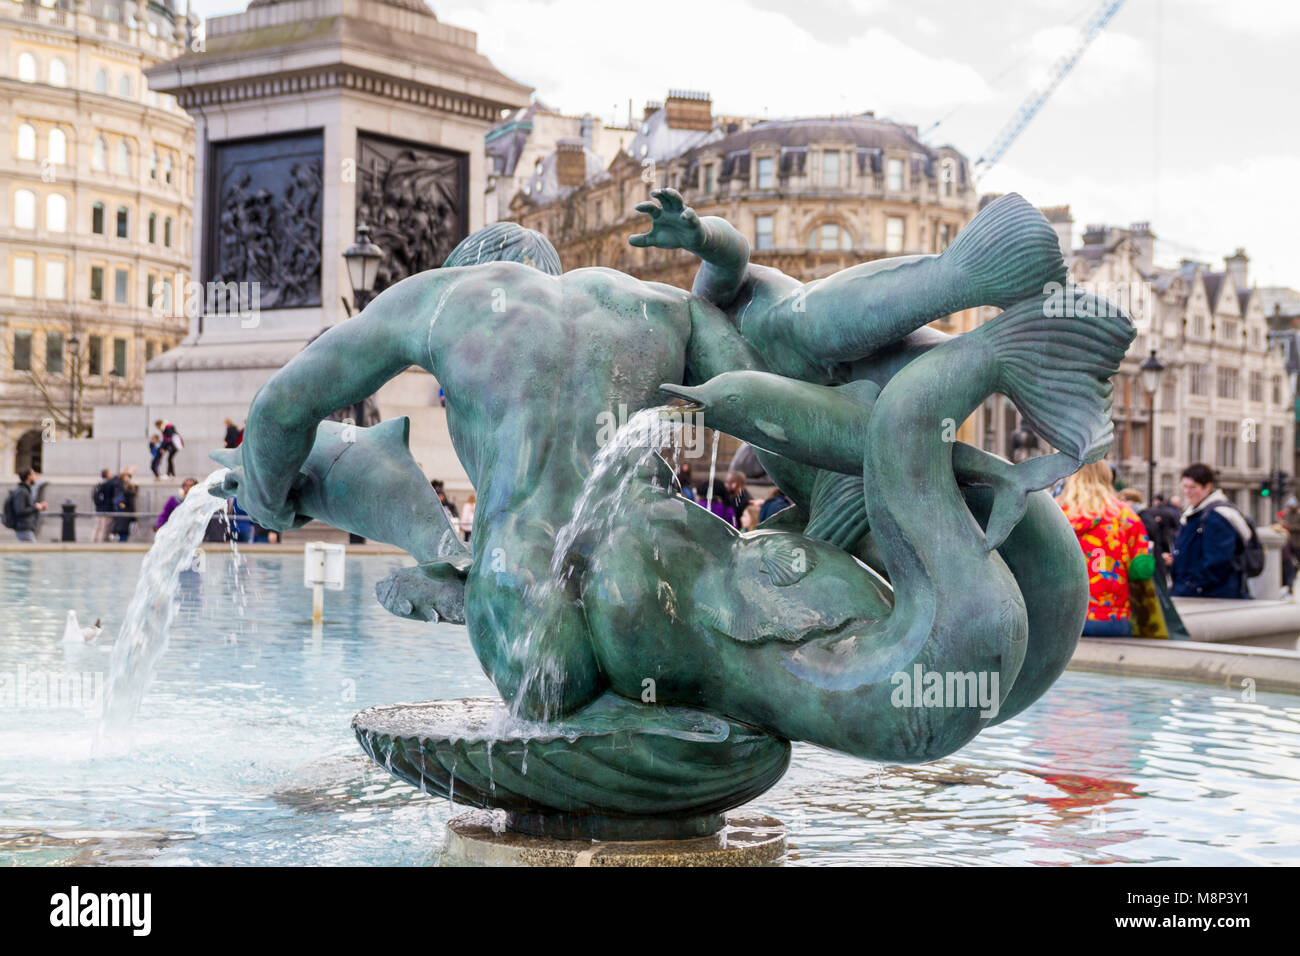 Trafalgar Square, Clyde Mcphatter, Mermaid Statue Sculpture, Dolphin, Londres UK Banque D'Images